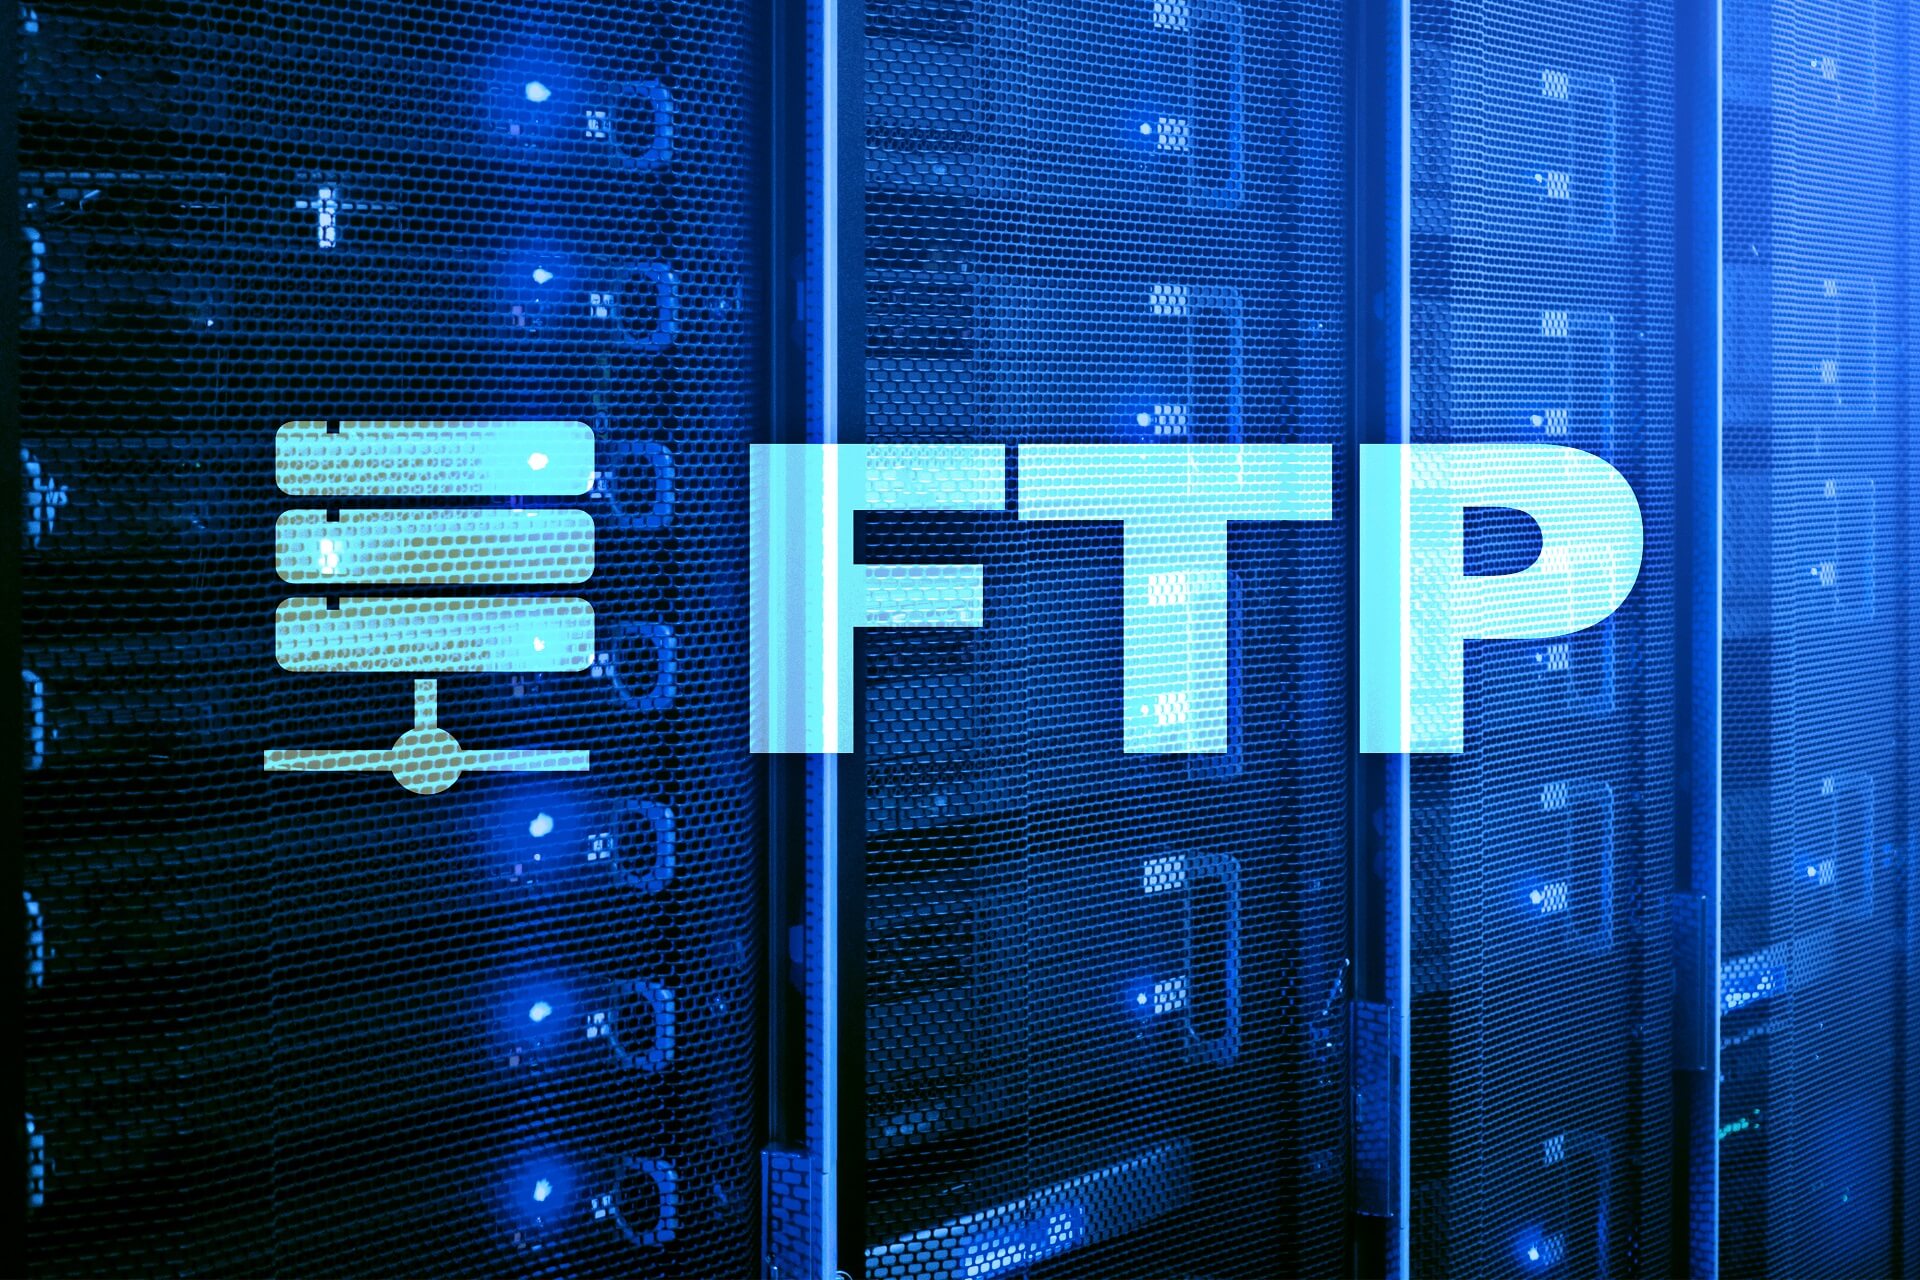 How to send and receive FTP files In Windows 10